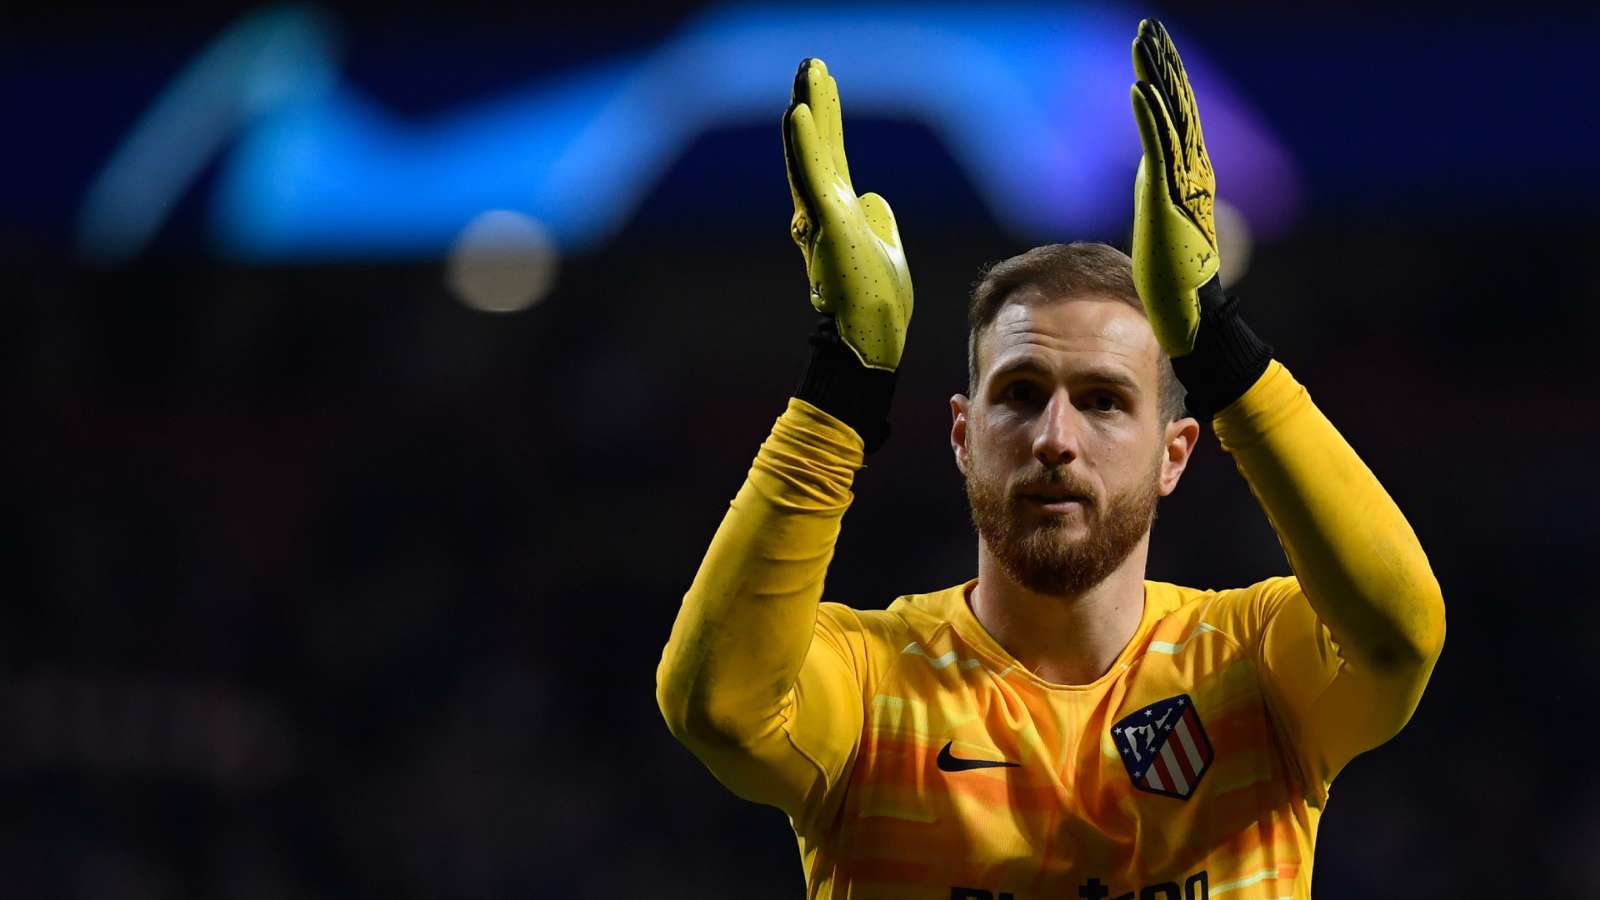 'Oblak is the Messi of goalkeepers' - Simeone praises Atletico shot-stopper after denying Liverpool